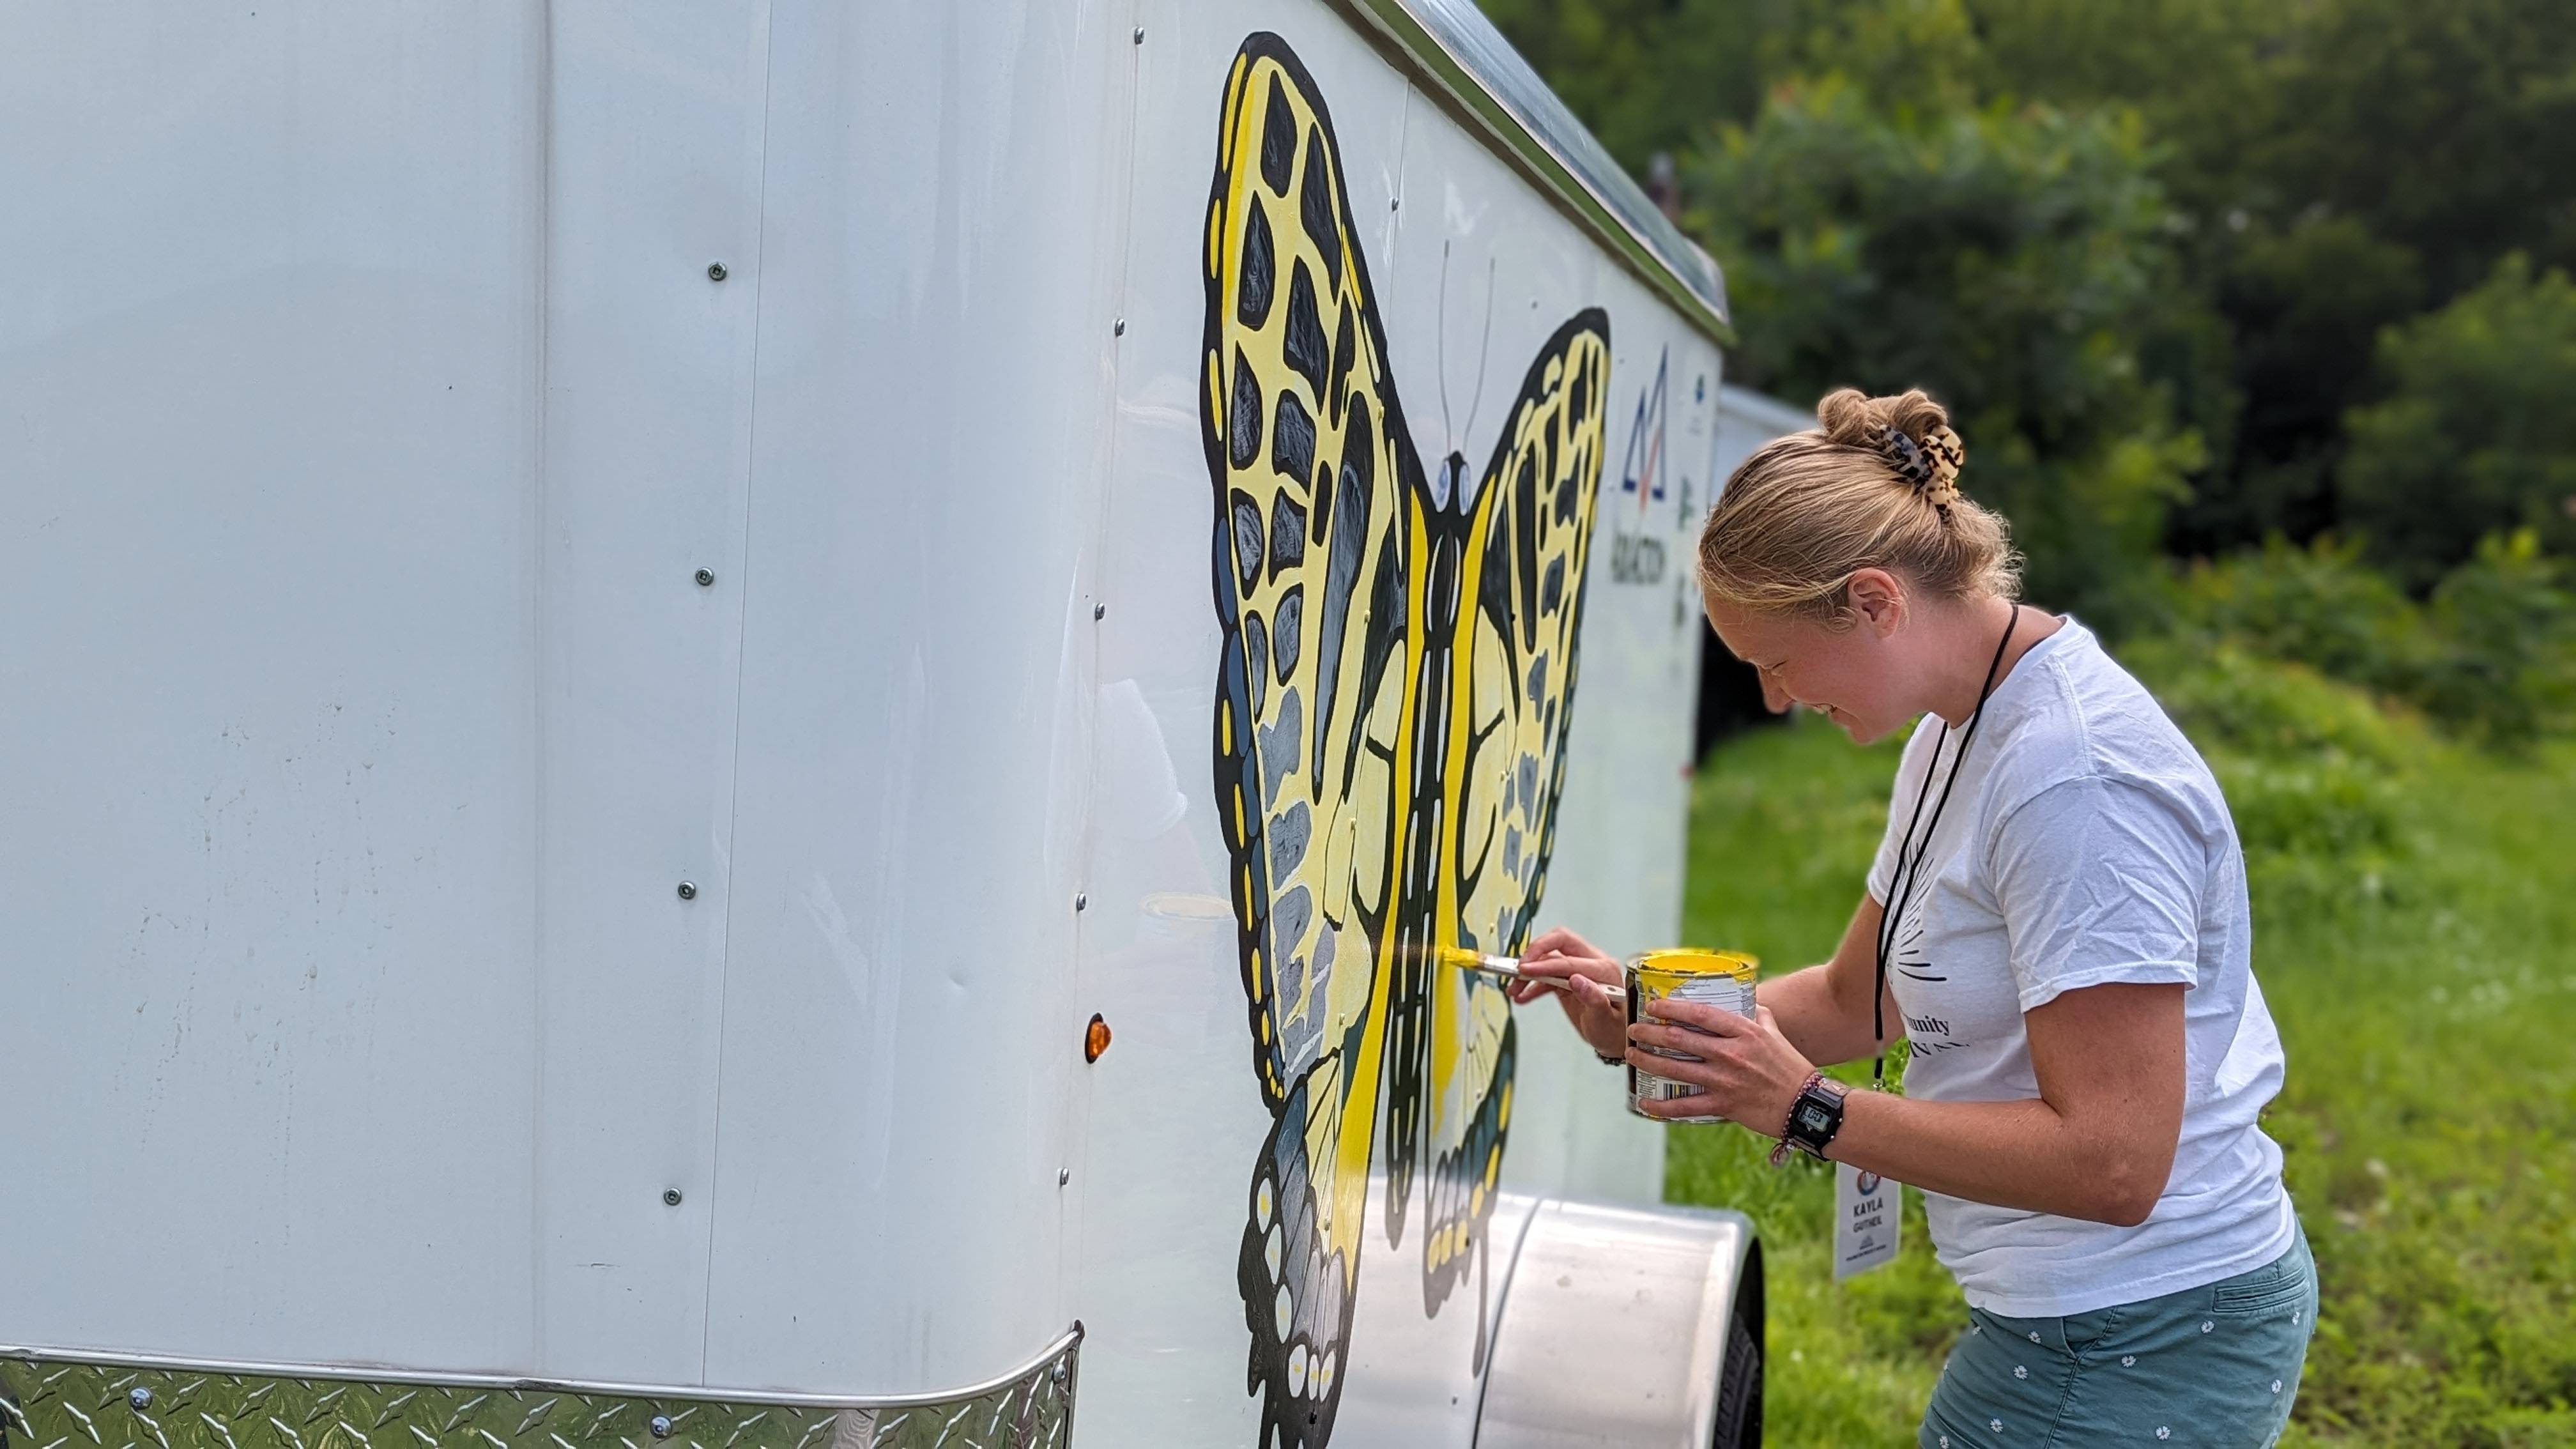 Kayla paints a monarch butterfly on a trailer used for the project